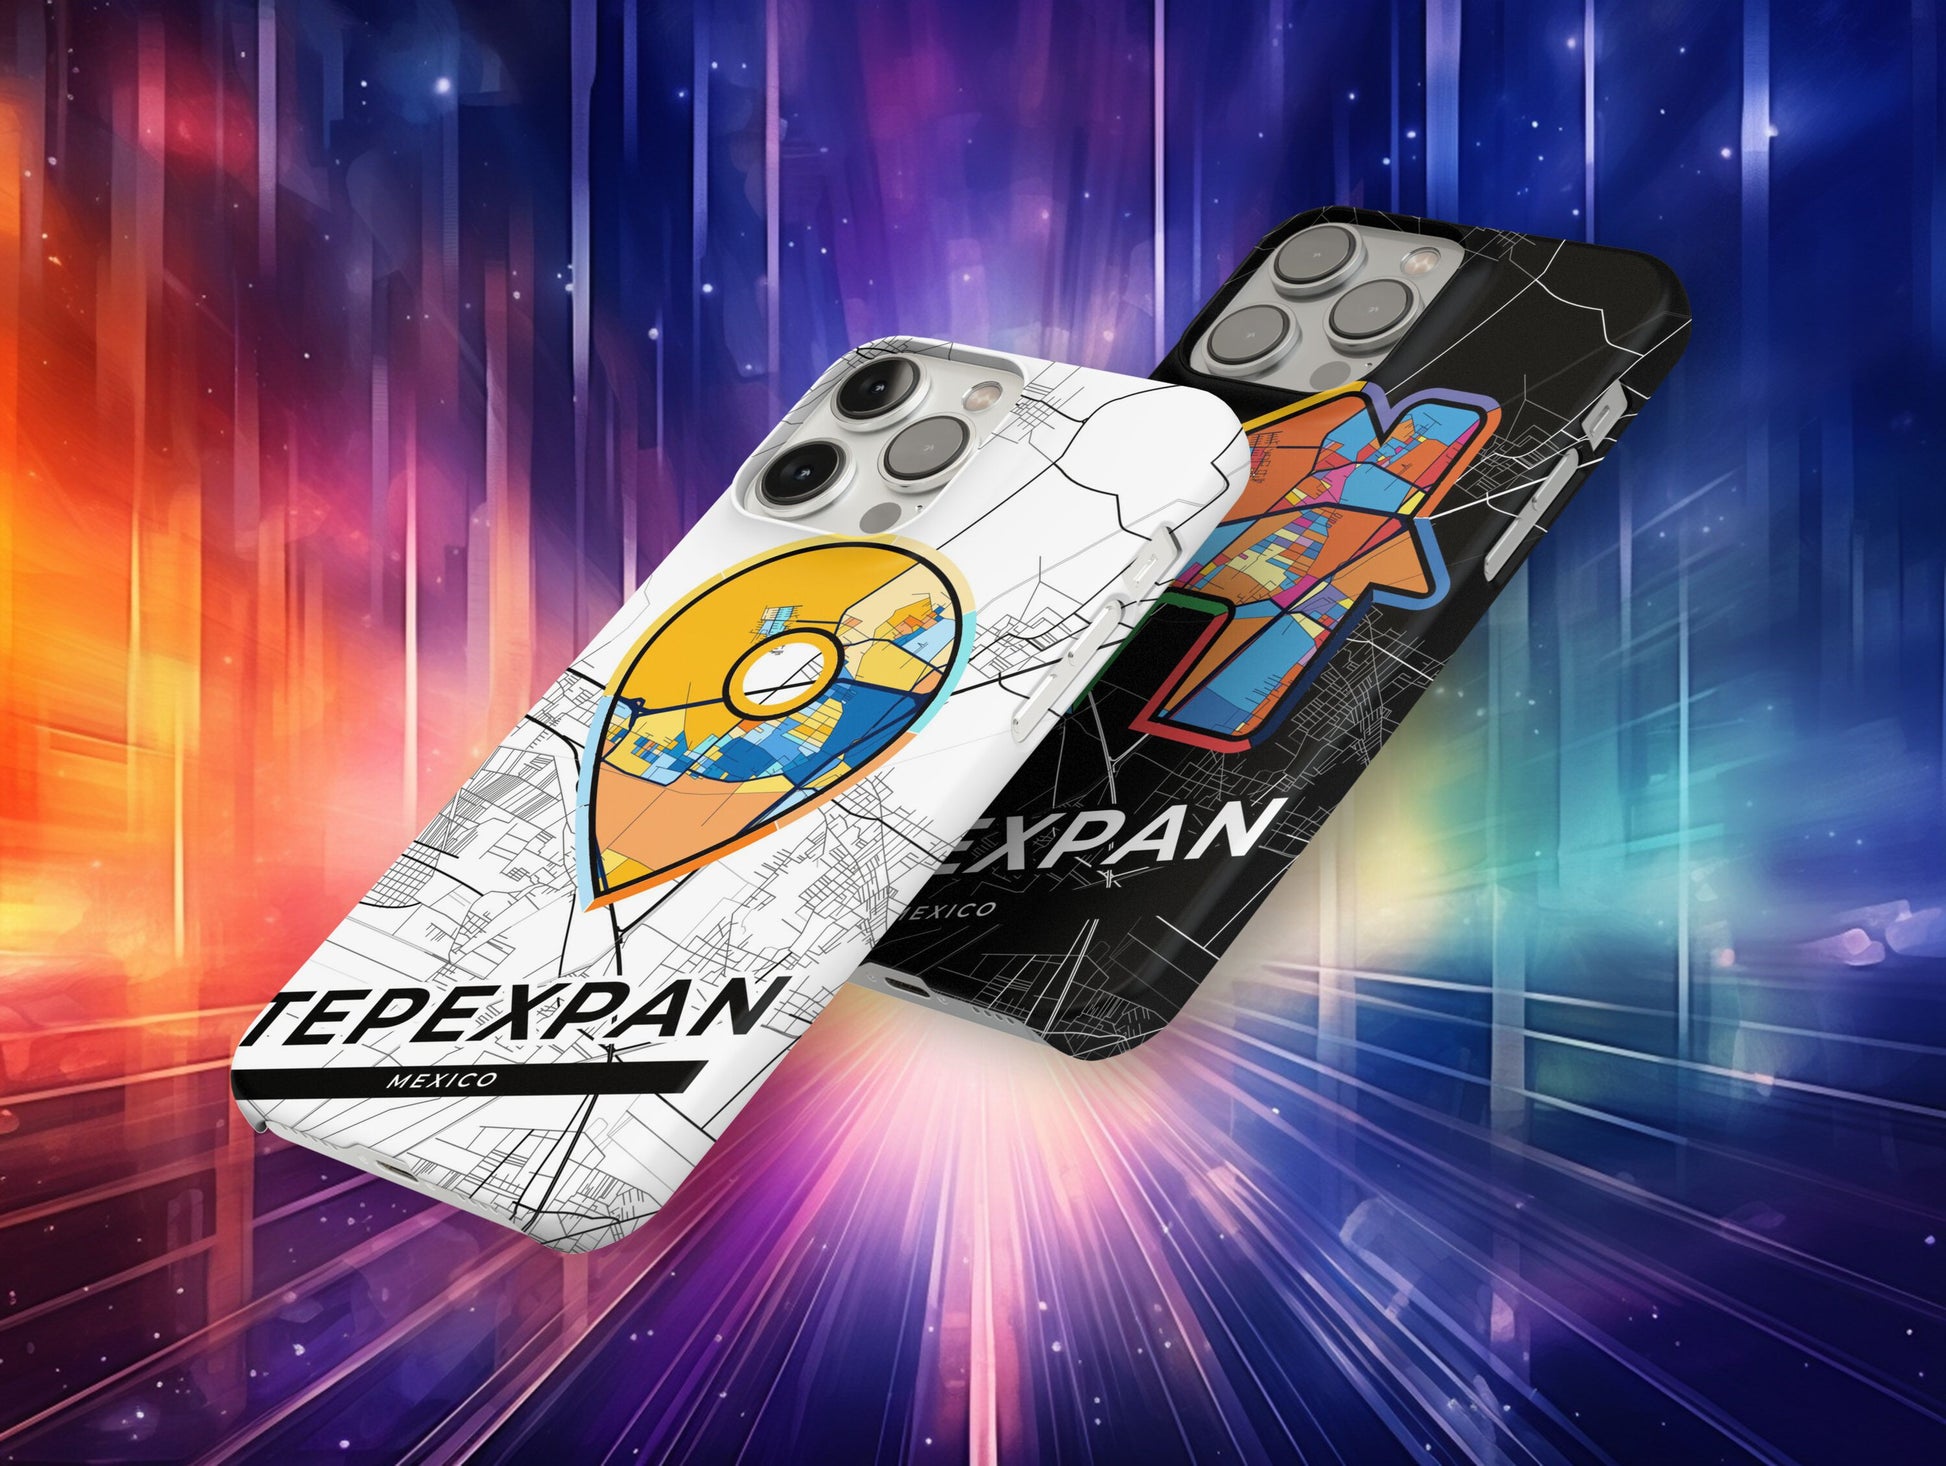 Tepexpan Mexico slim phone case with colorful icon